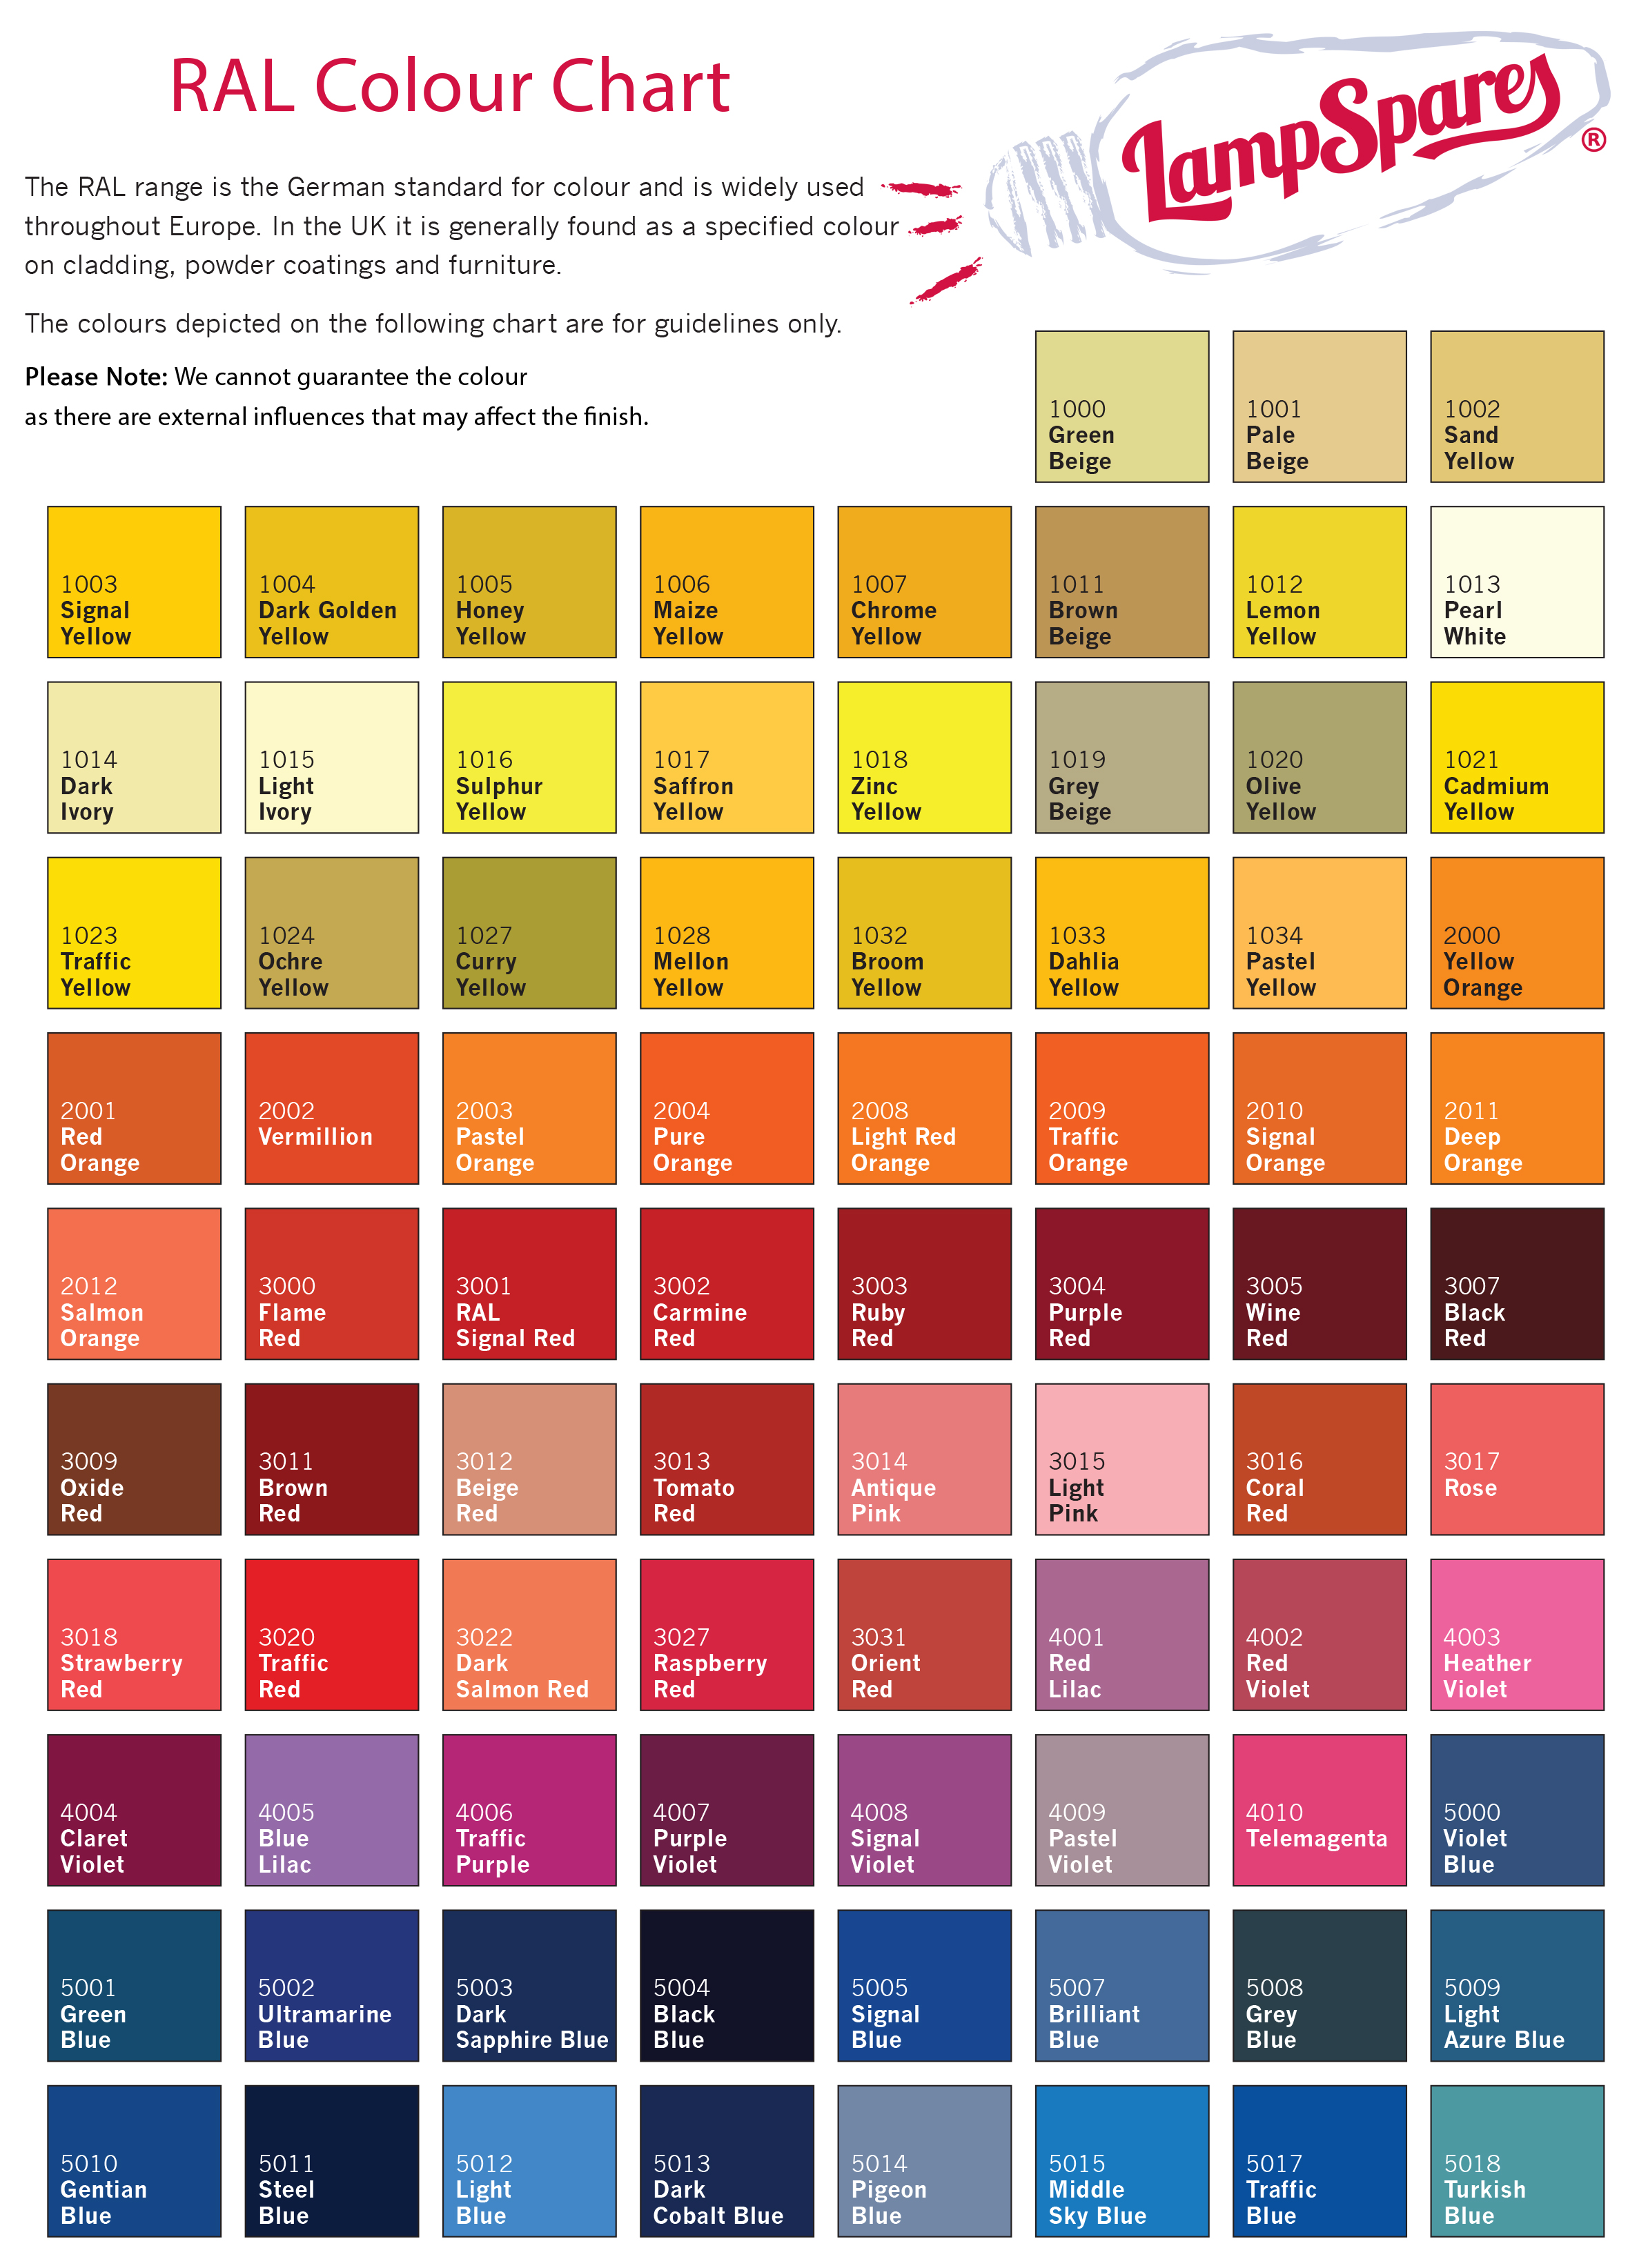 RAL_Colour_Chart-page_1.jpg